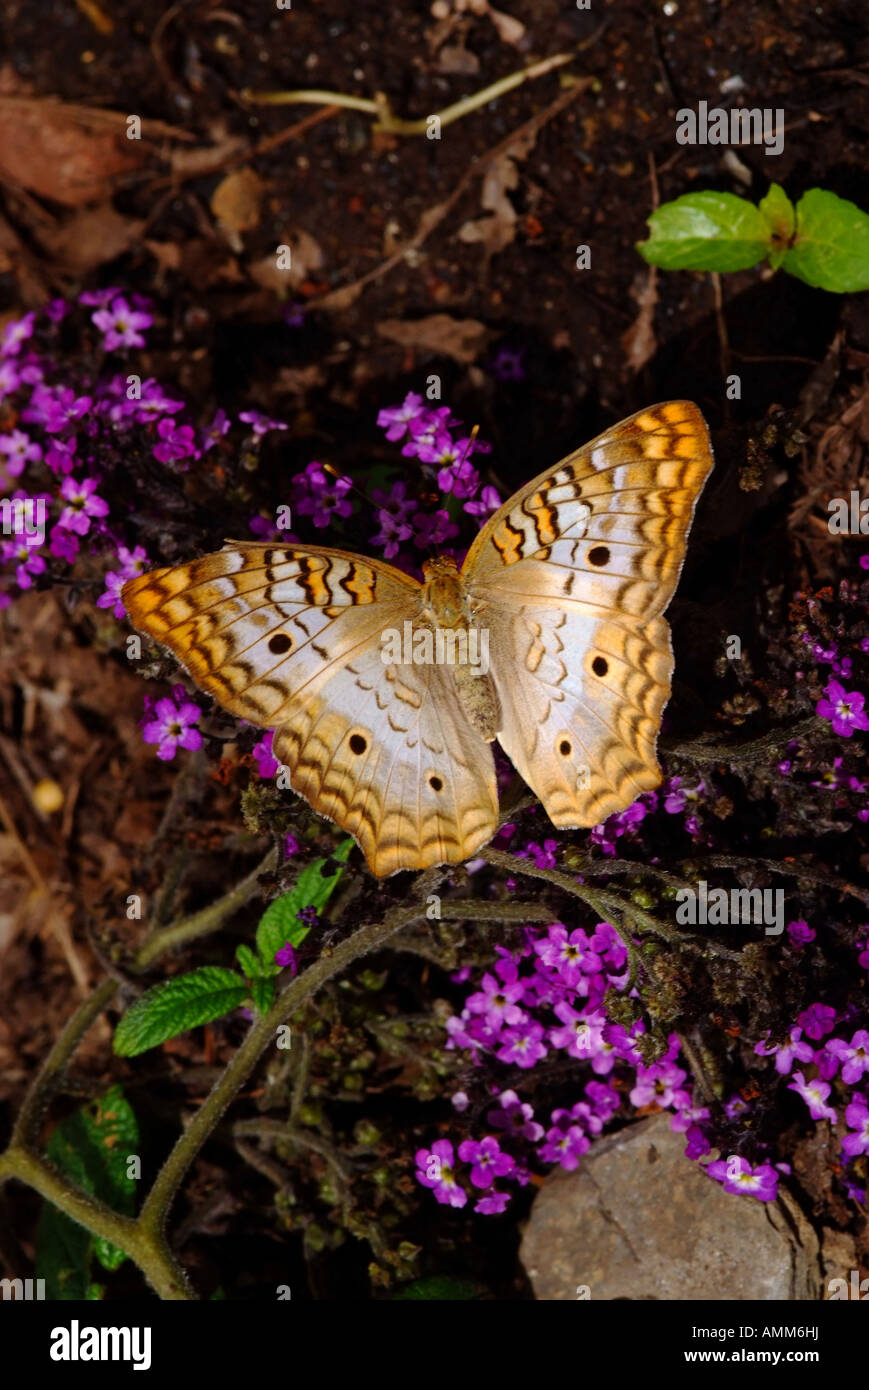 White Peacock Butterfly Resting on Purple Flowers at Hershey Gardens Pennsylvania United States America USA Stock Photo